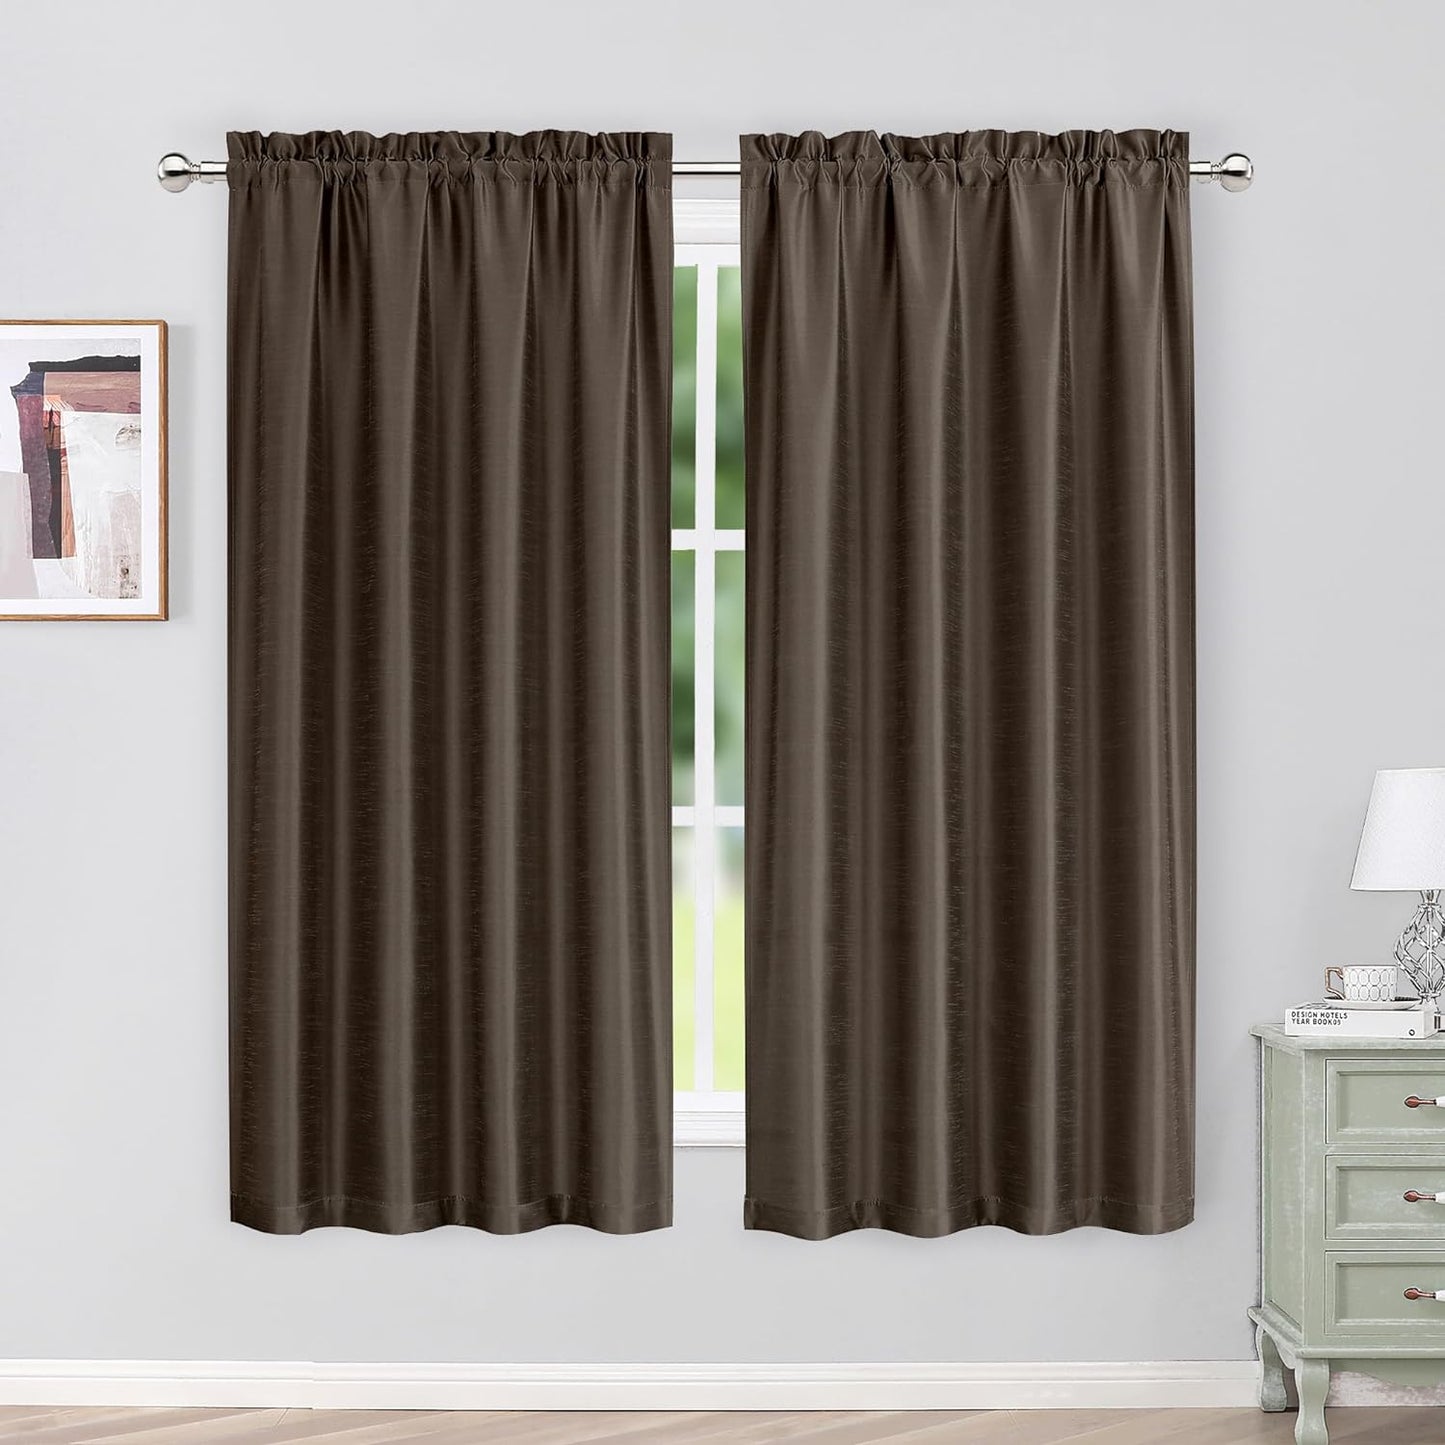 Chyhomenyc Uptown Sage Green Kitchen Curtains 45 Inch Length 2 Panels, Room Darkening Faux Silk Chic Fabric Short Window Curtains for Bedroom Living Room, Each 30Wx45L  Chyhomenyc Chocolate 2X40"Wx63"L 